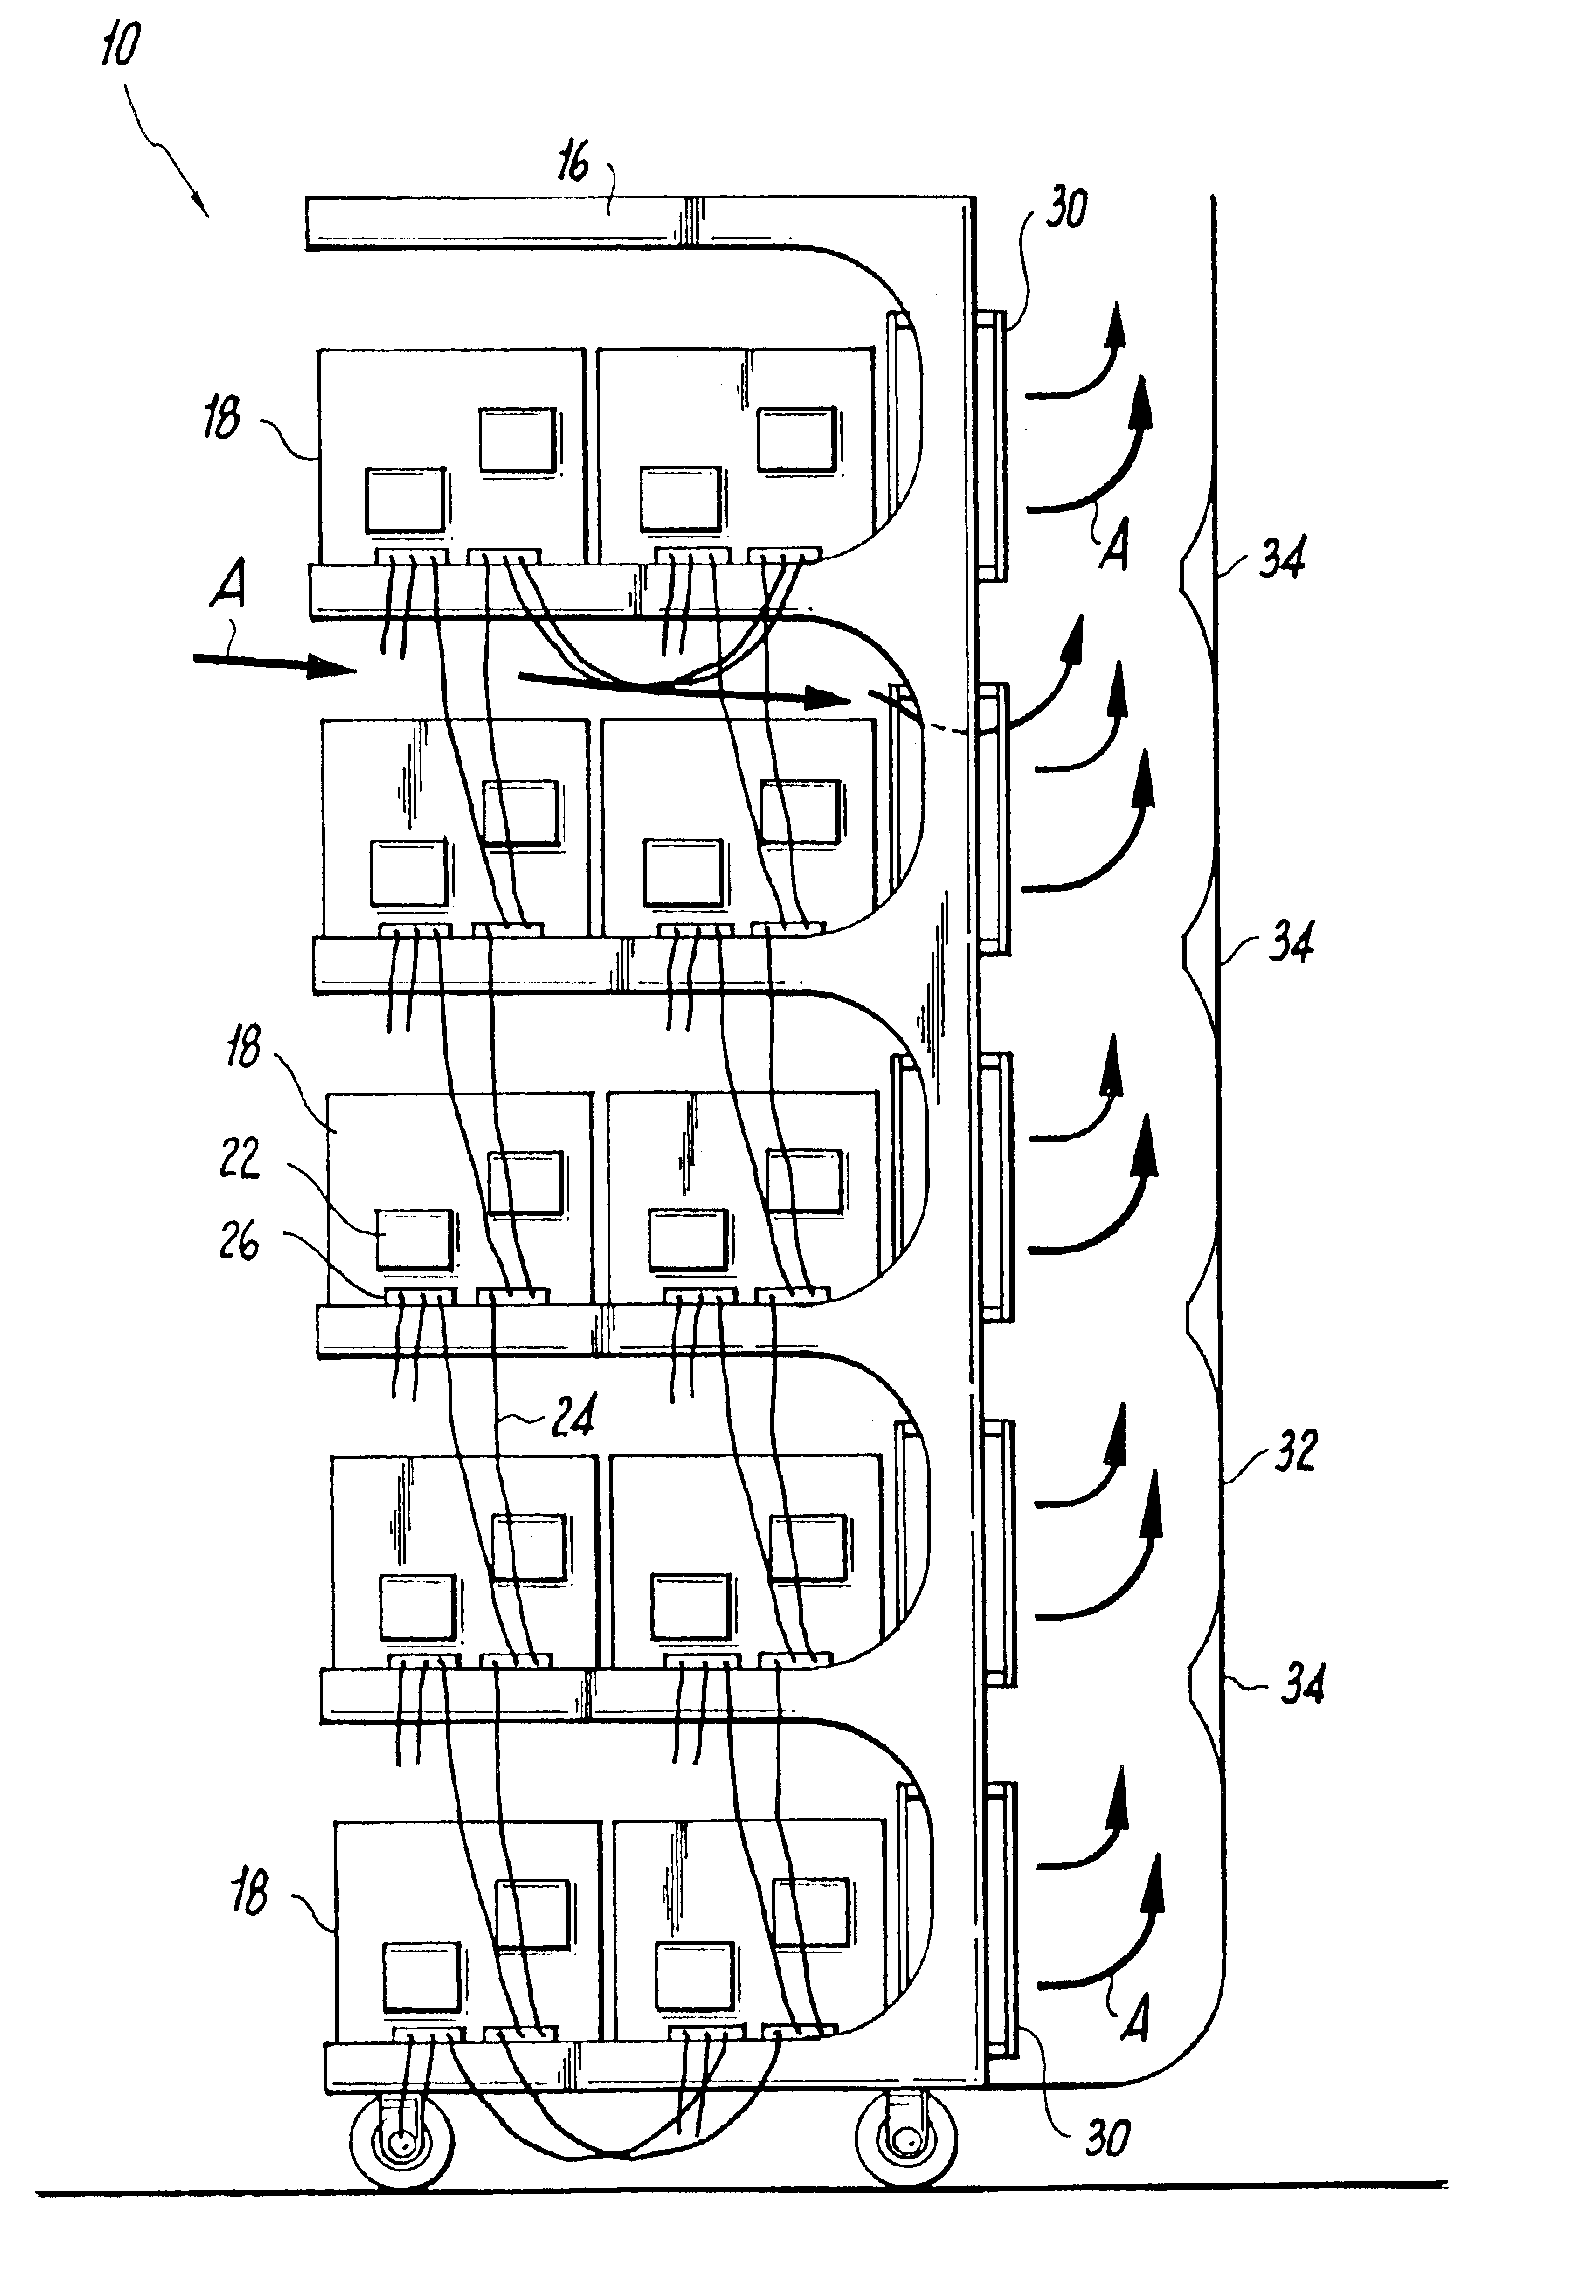 Method of constructing a multicomputer system